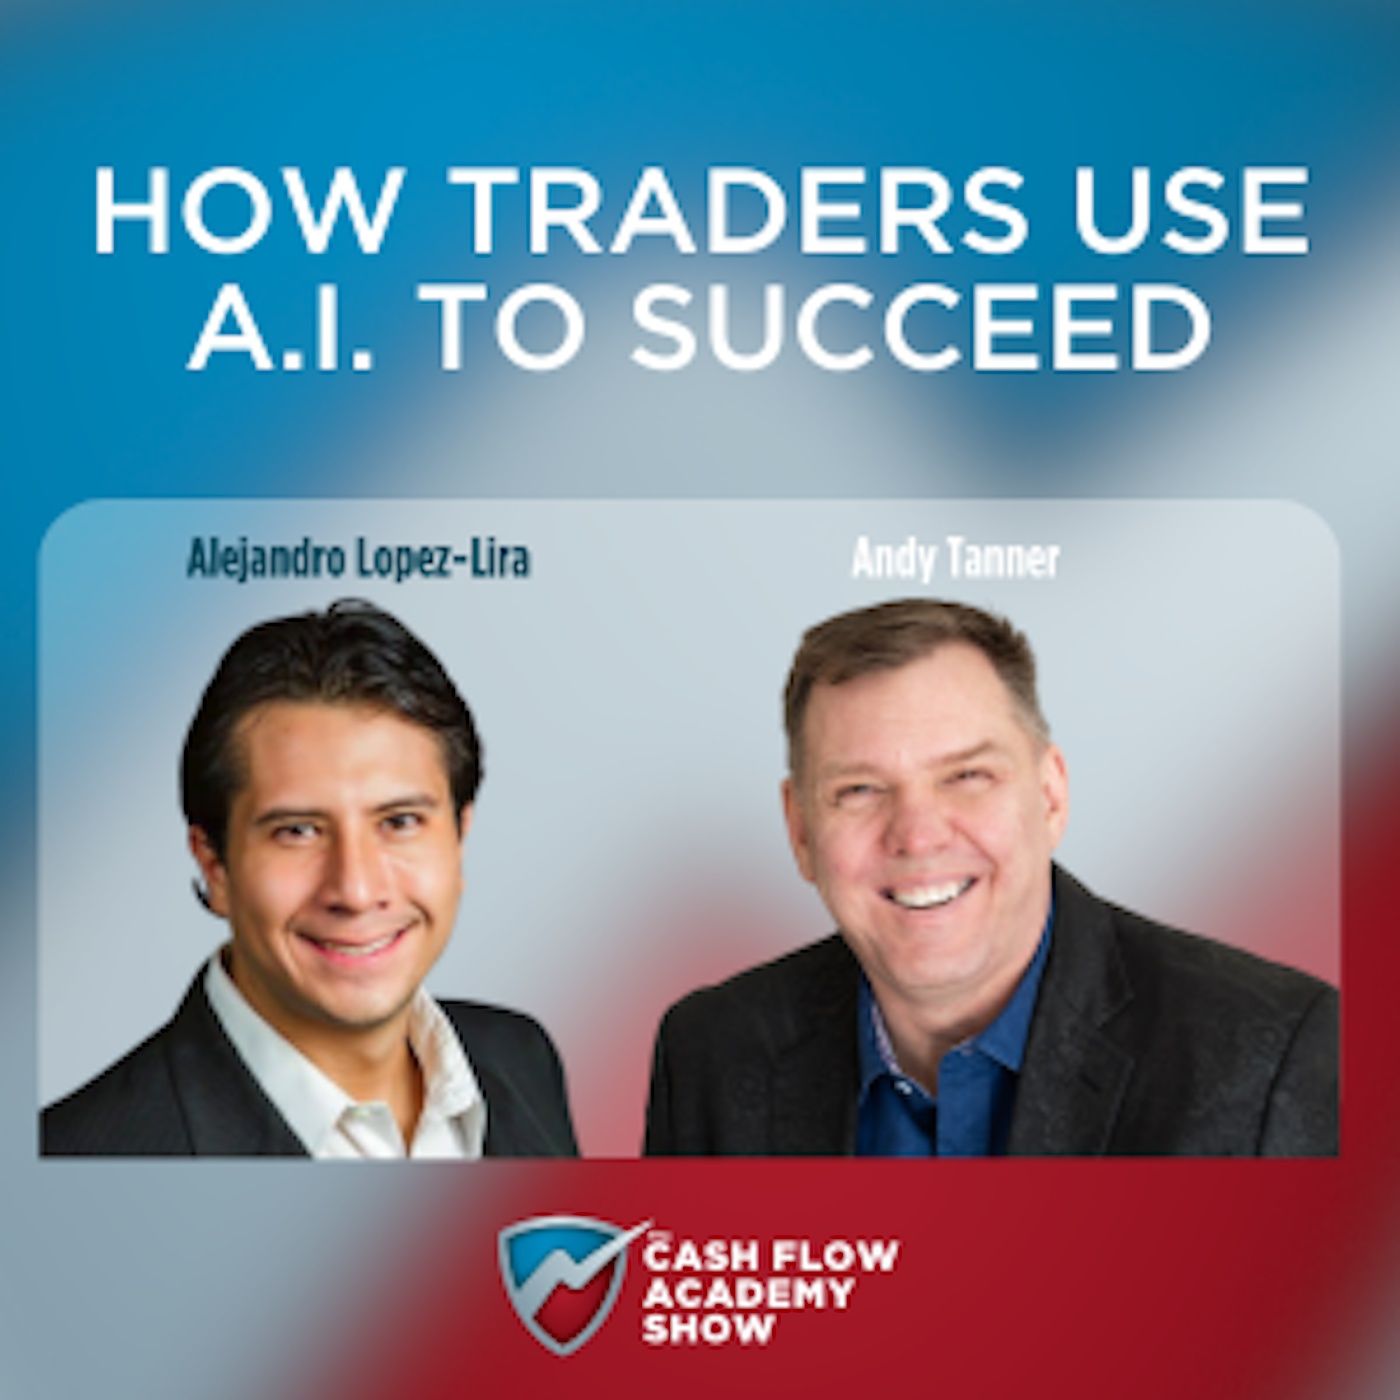 How Traders Use A.I. To Succeed